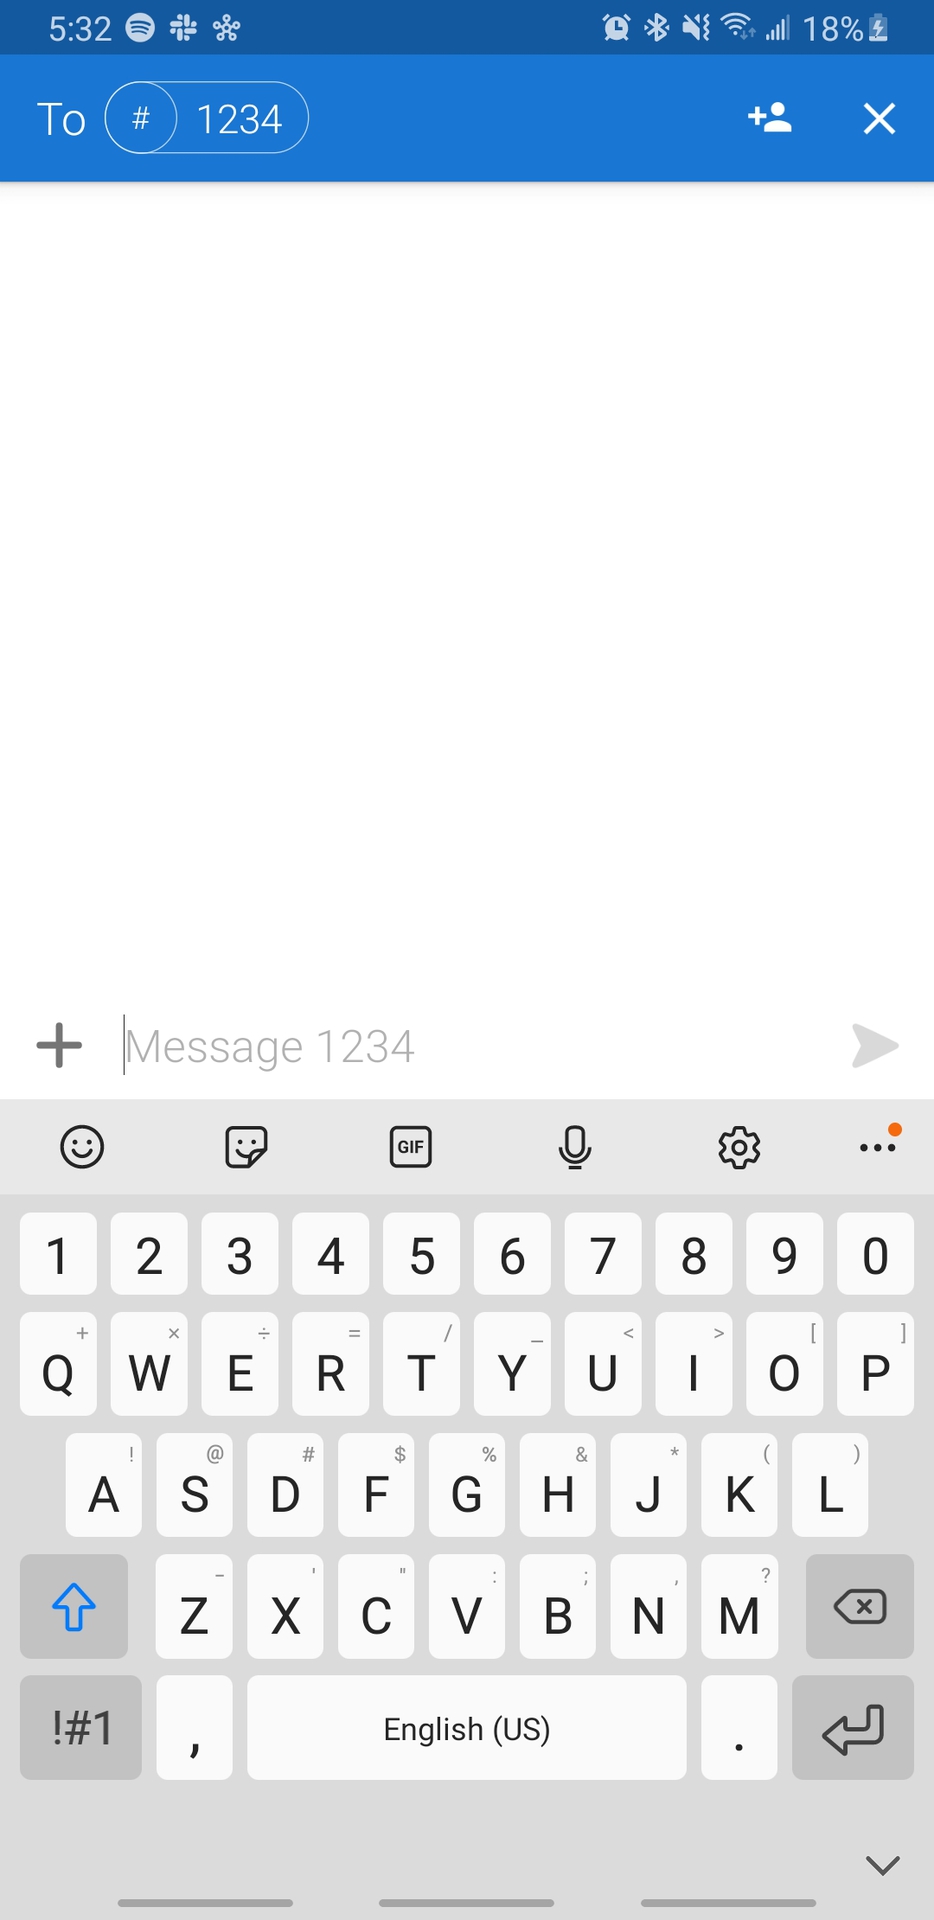 speech to text windows 10 mobile when texting